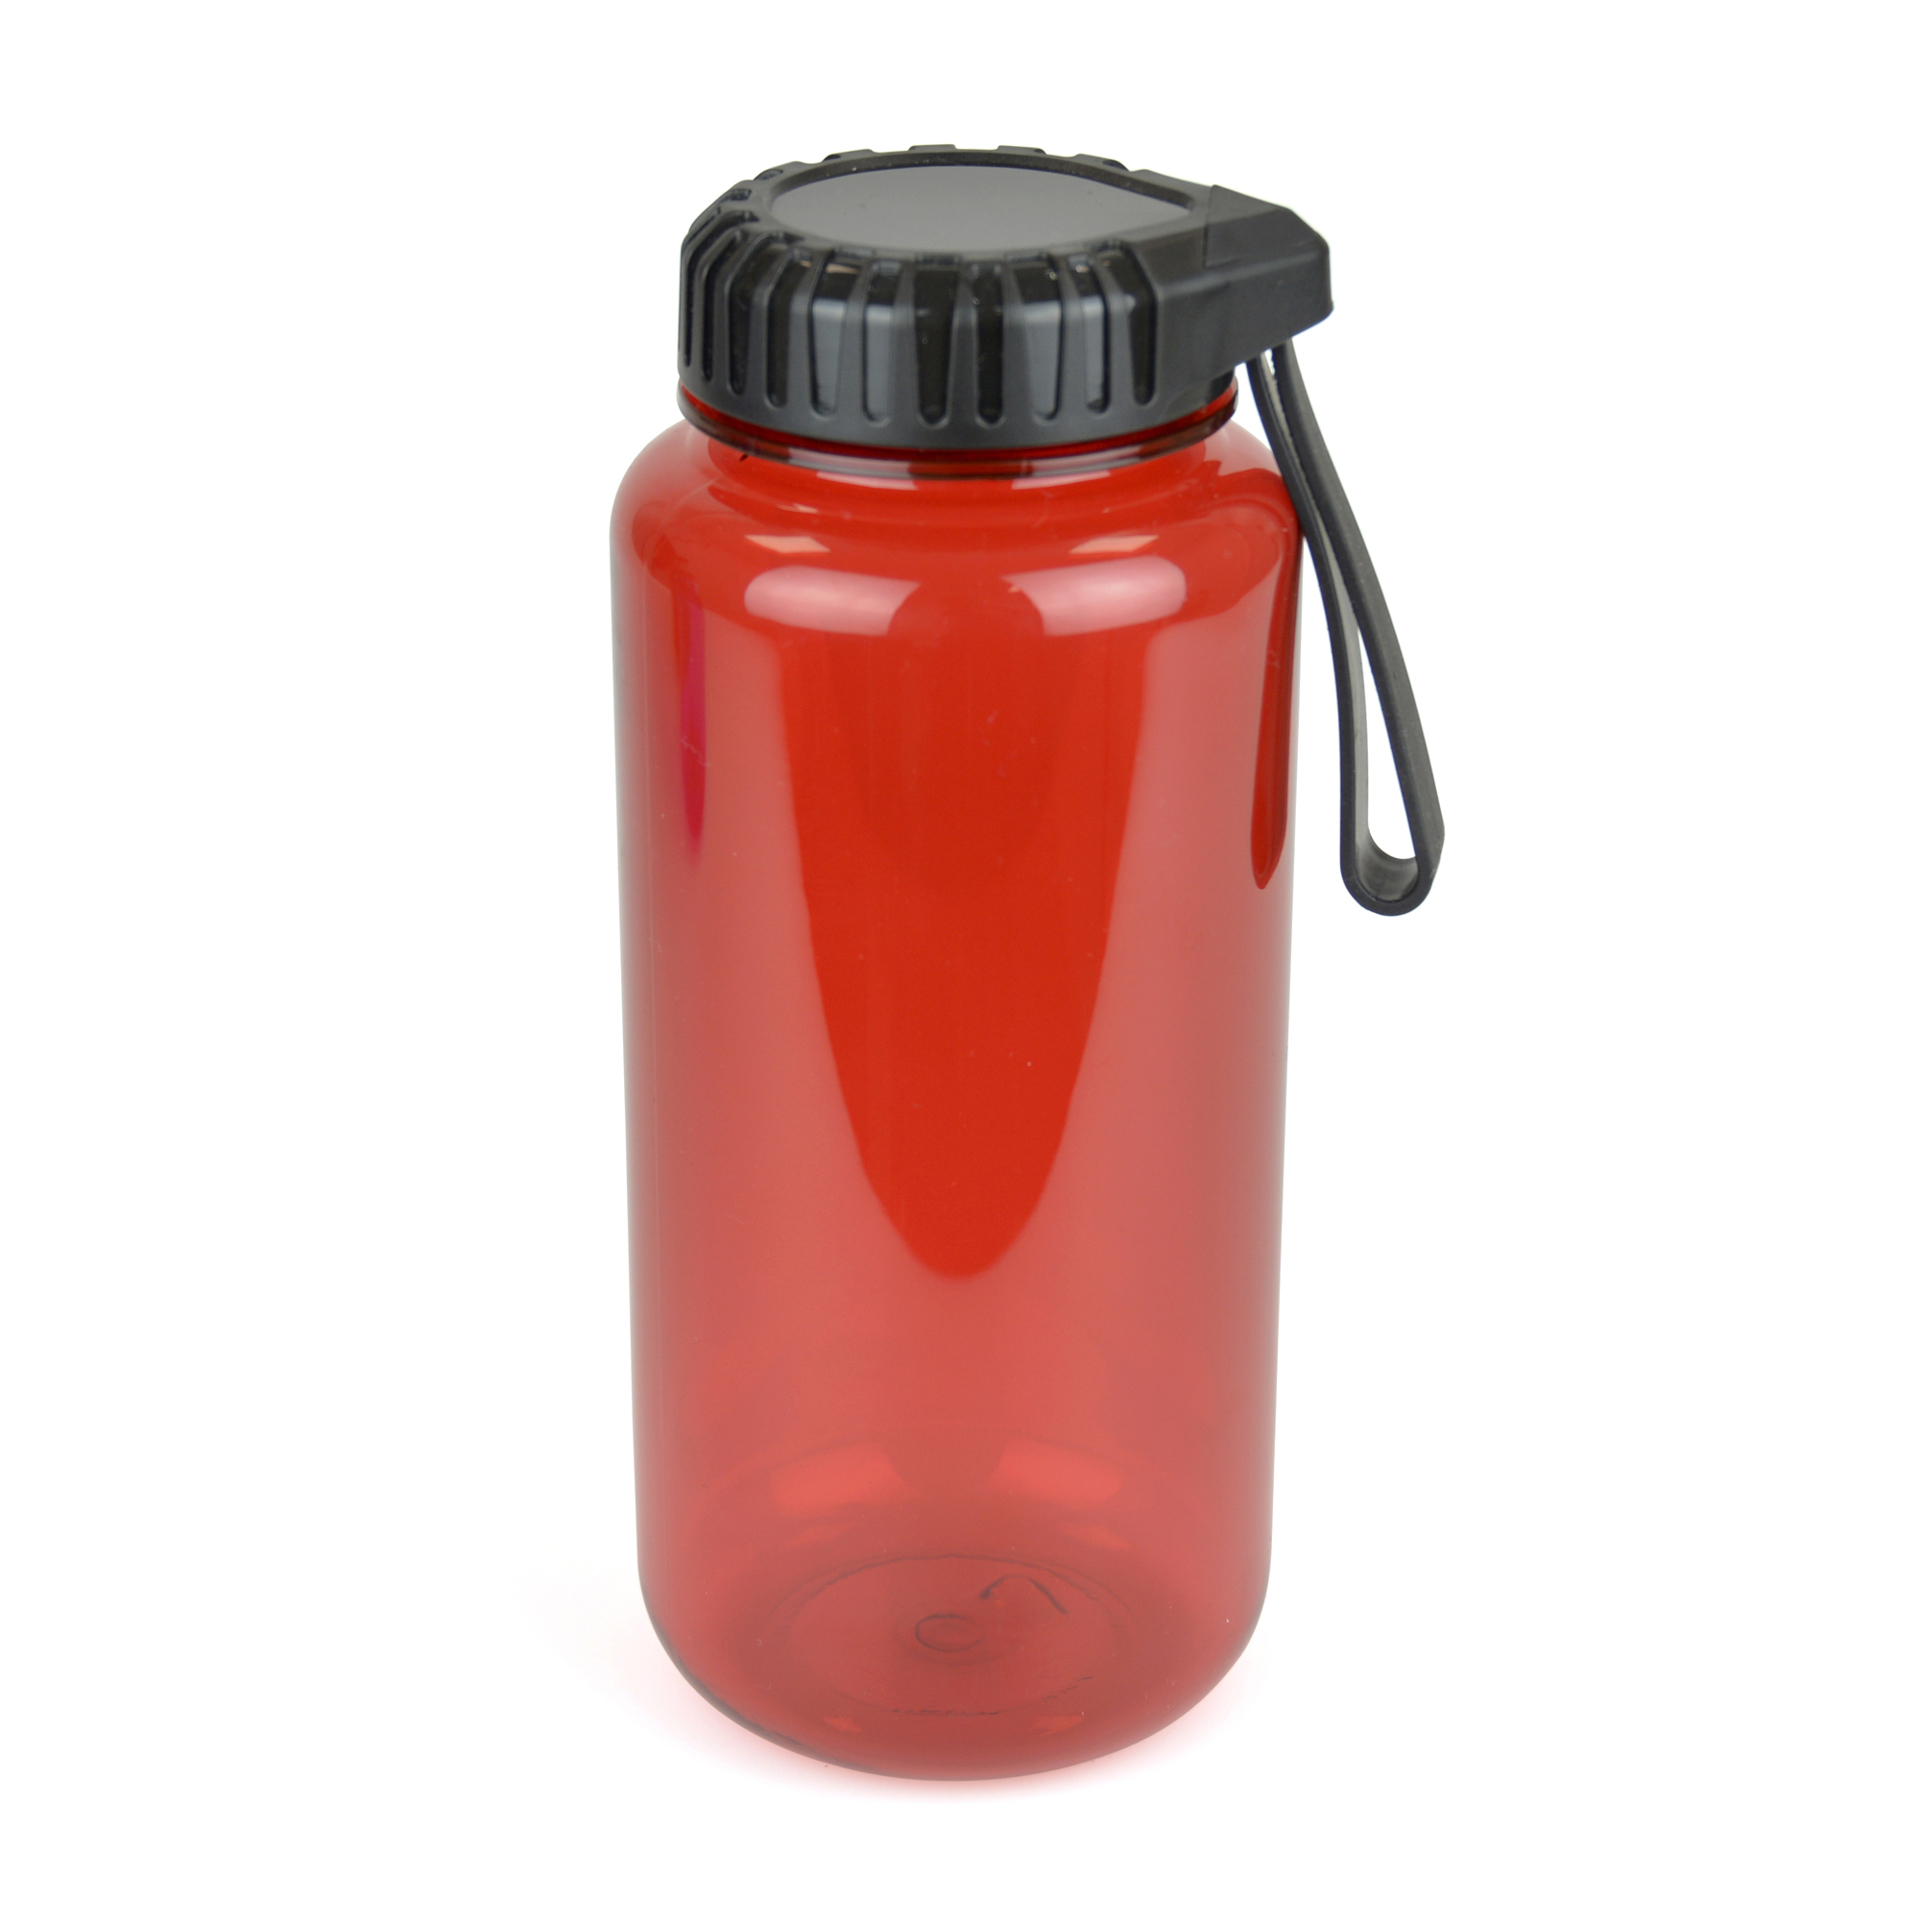 Gowing Sports bottle red body black lid